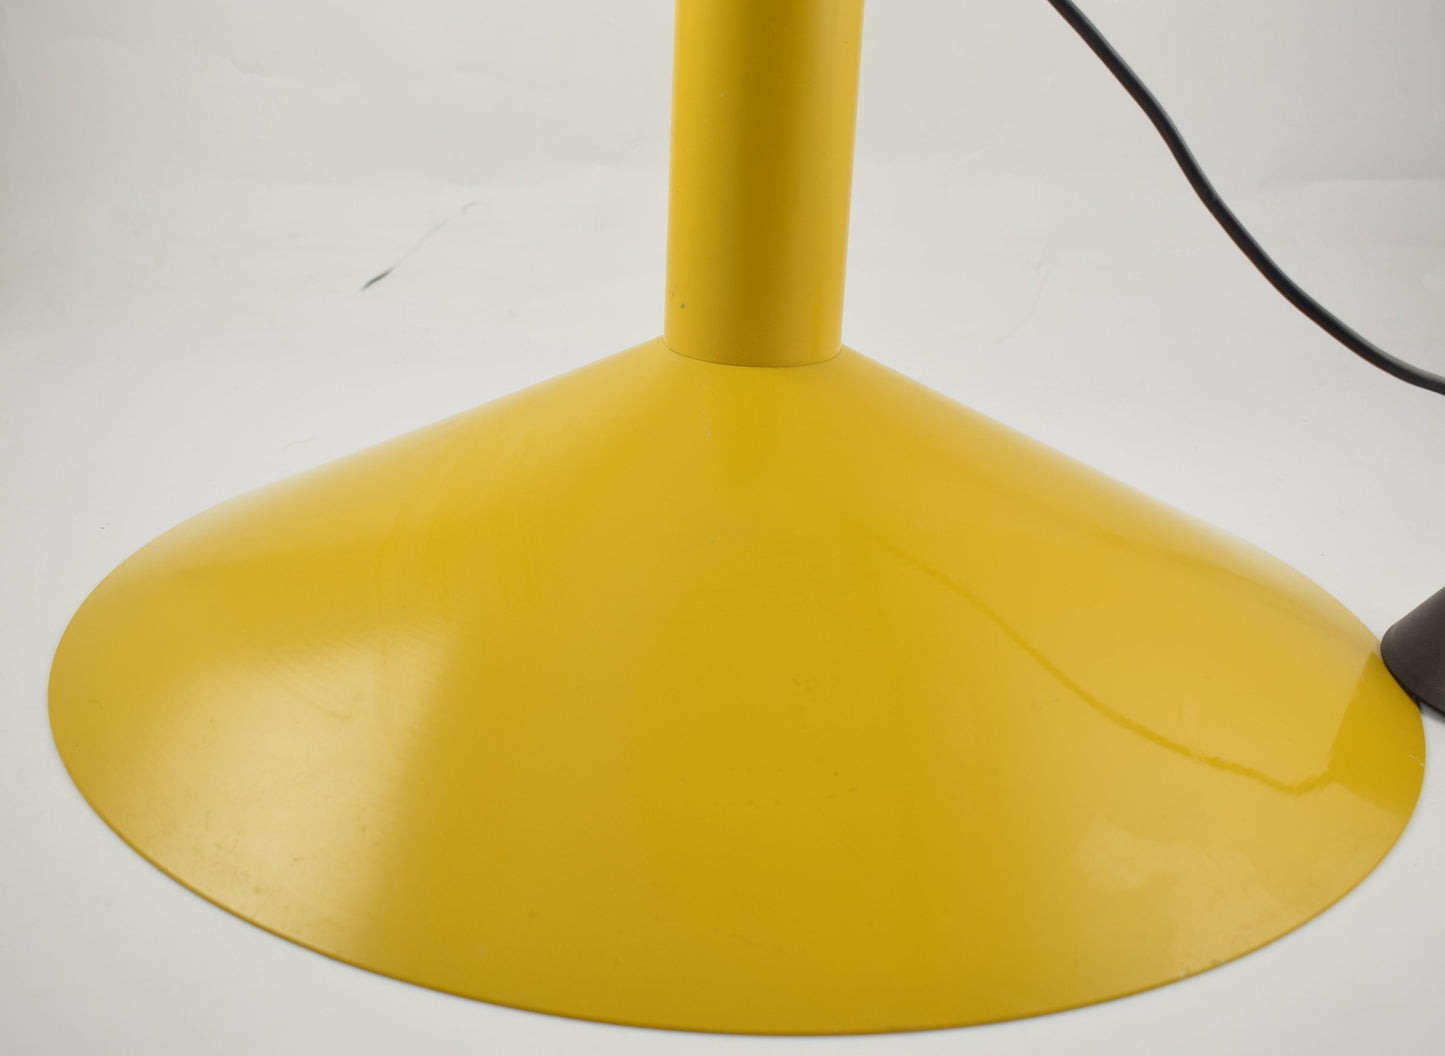 Fog and Morup Formel 3 yellow pendant lamp designed by Hans Due, Denmark 1975.